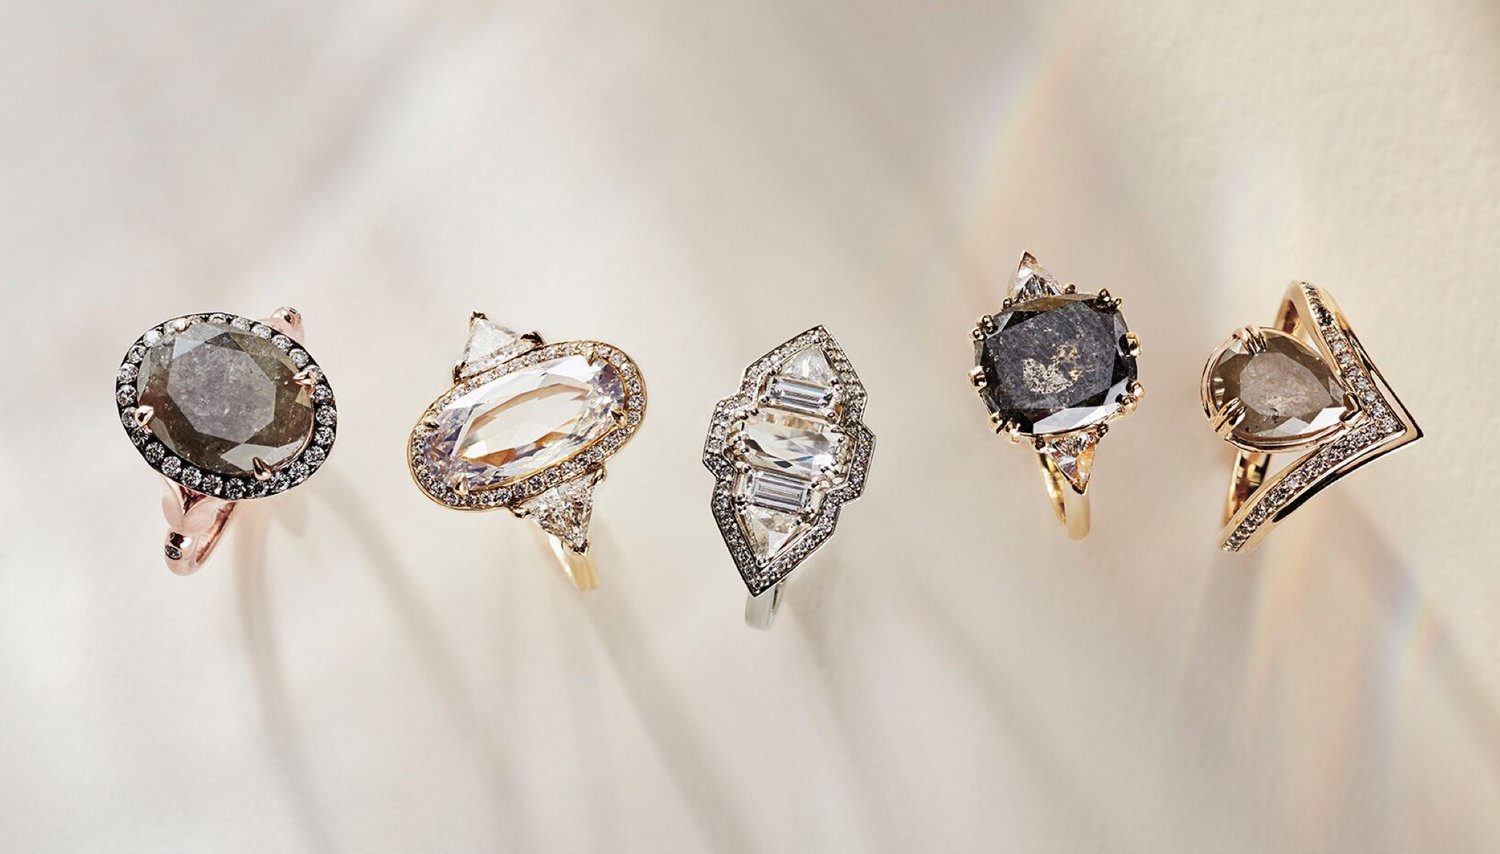 A horizontal cascade of 5 engagement rings by Anna Sheffield, all with large and unique diamonds in one-of-a-kind engagement ring settings.